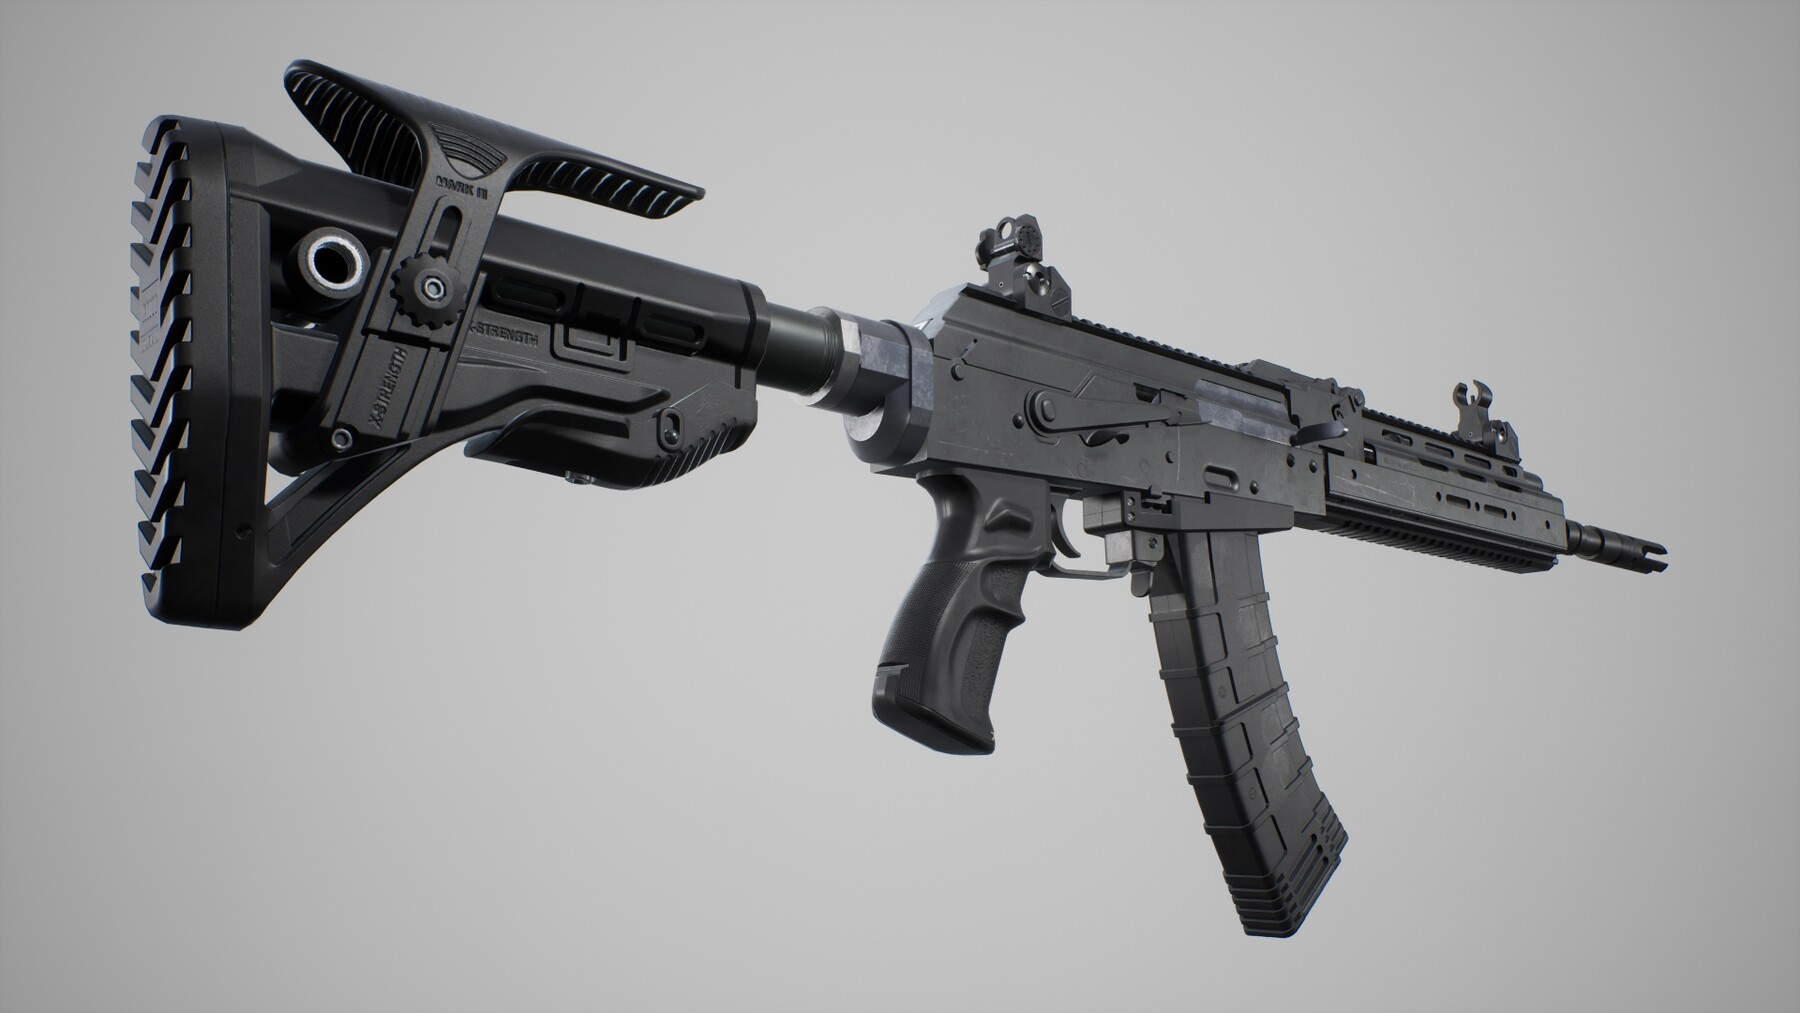 FPS Weapon AK47 (Modular, Customizable) in Weapons - UE Marketplace